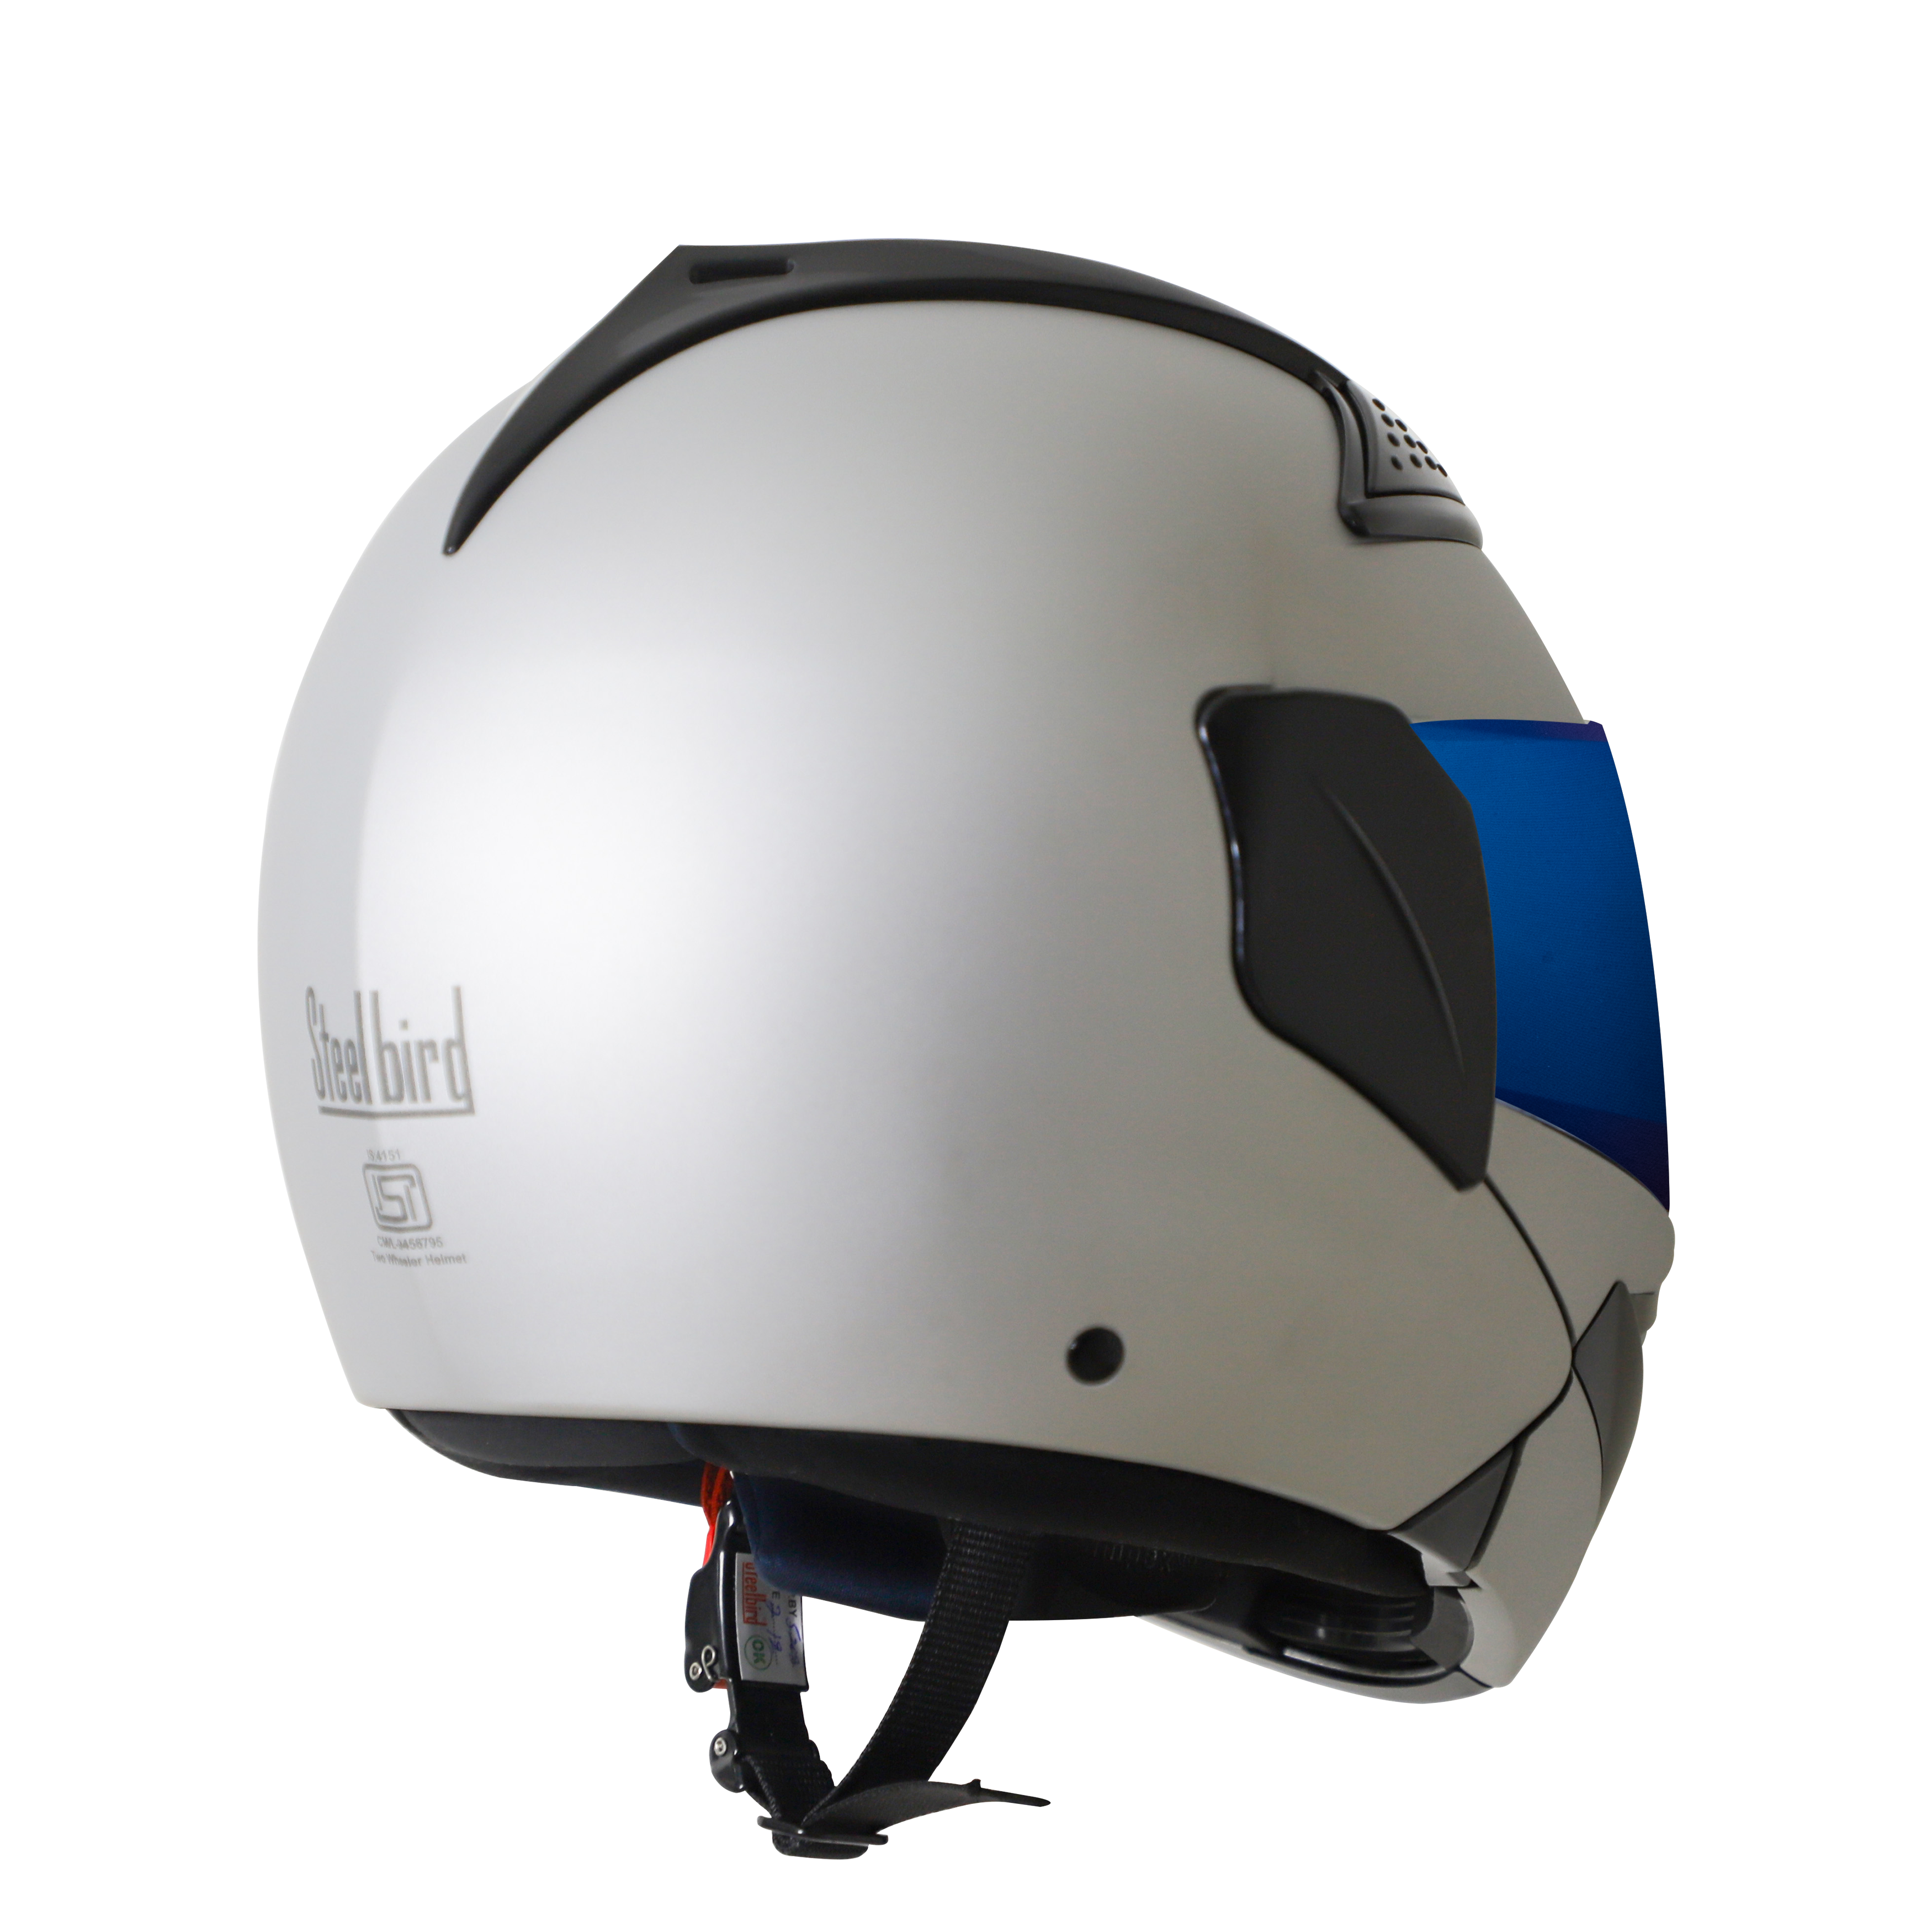 Steelbird SB-34 ISI Certified Flip-Up Helmet For Men And Women (Glossy Silver With Chrome Blue Visor)